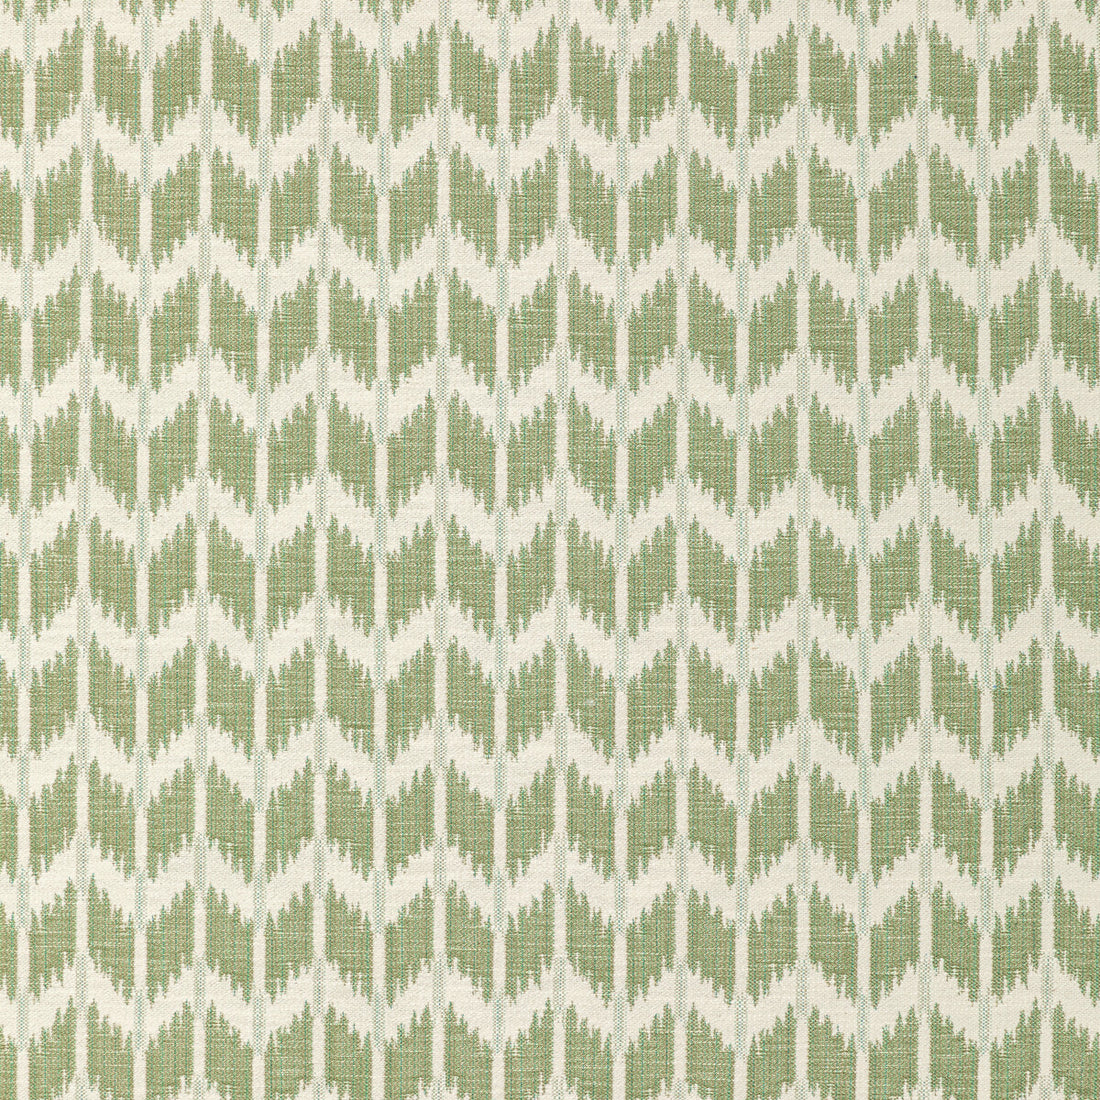 Lorient Weave fabric in celery color - pattern 8022111.3.0 - by Brunschwig &amp; Fils in the Lorient Weaves collection